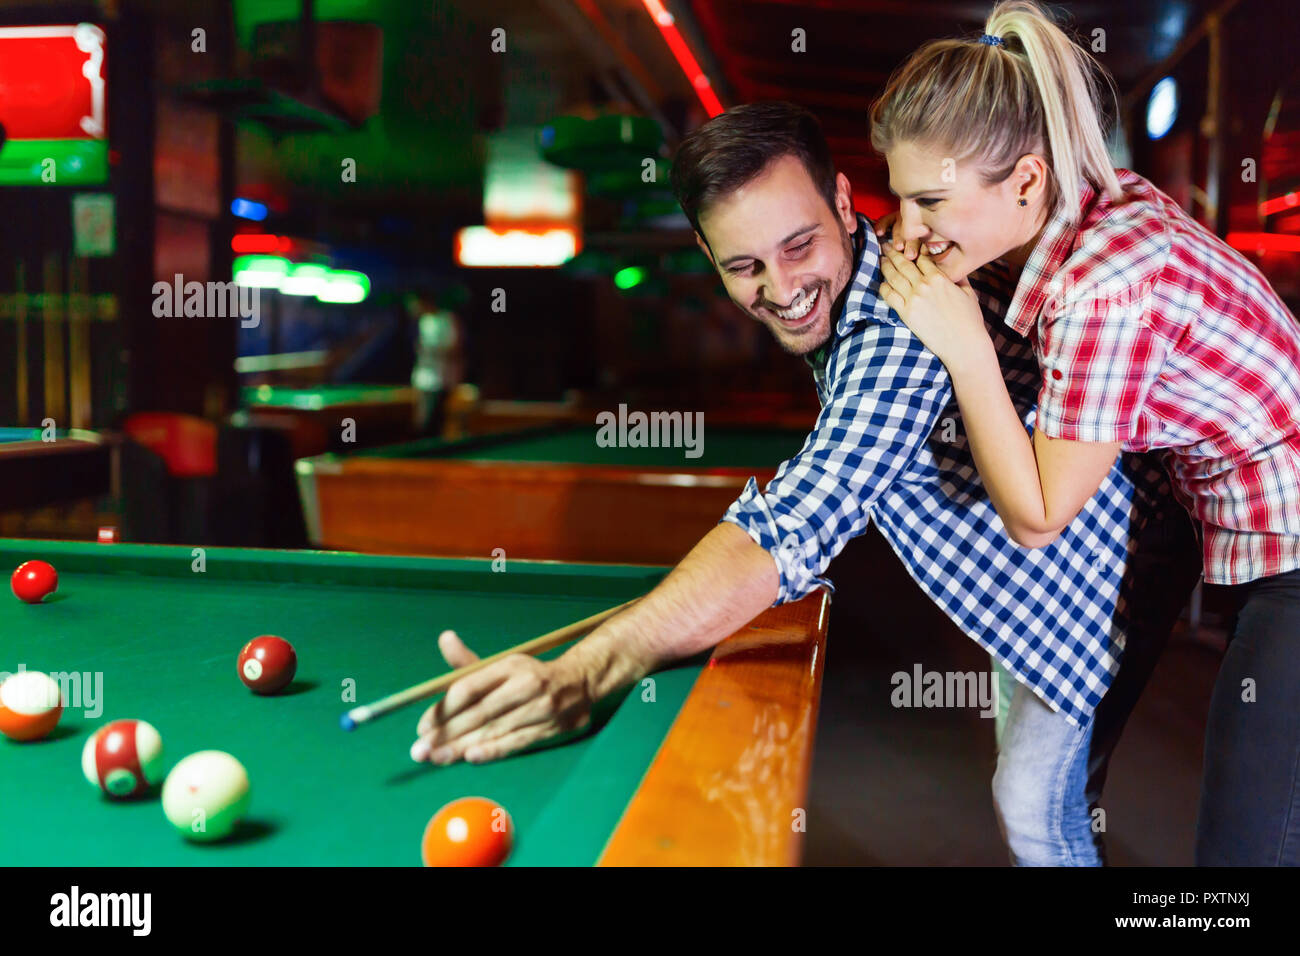 Young couple playing together pool in bar Stock Photo